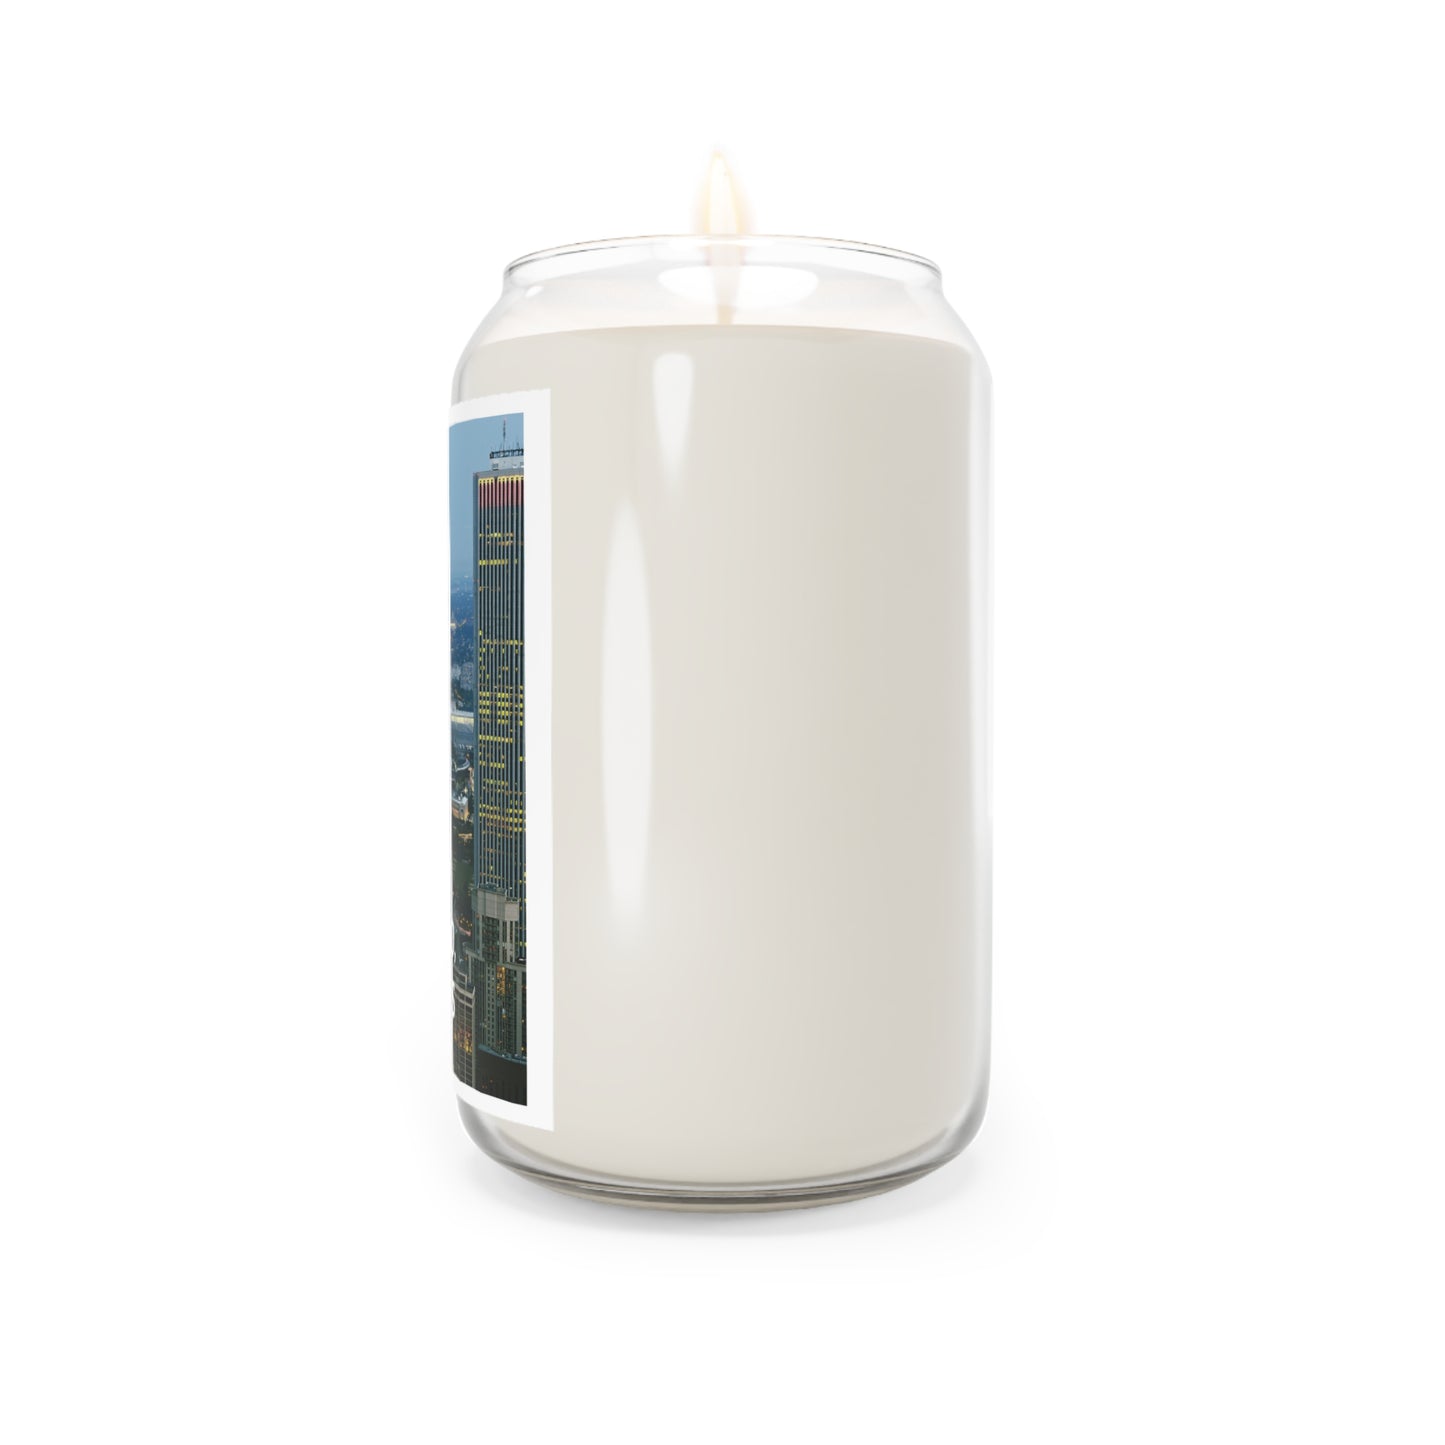 Chicago, Illinois (#021) - Home Town Candles, 13.75oz